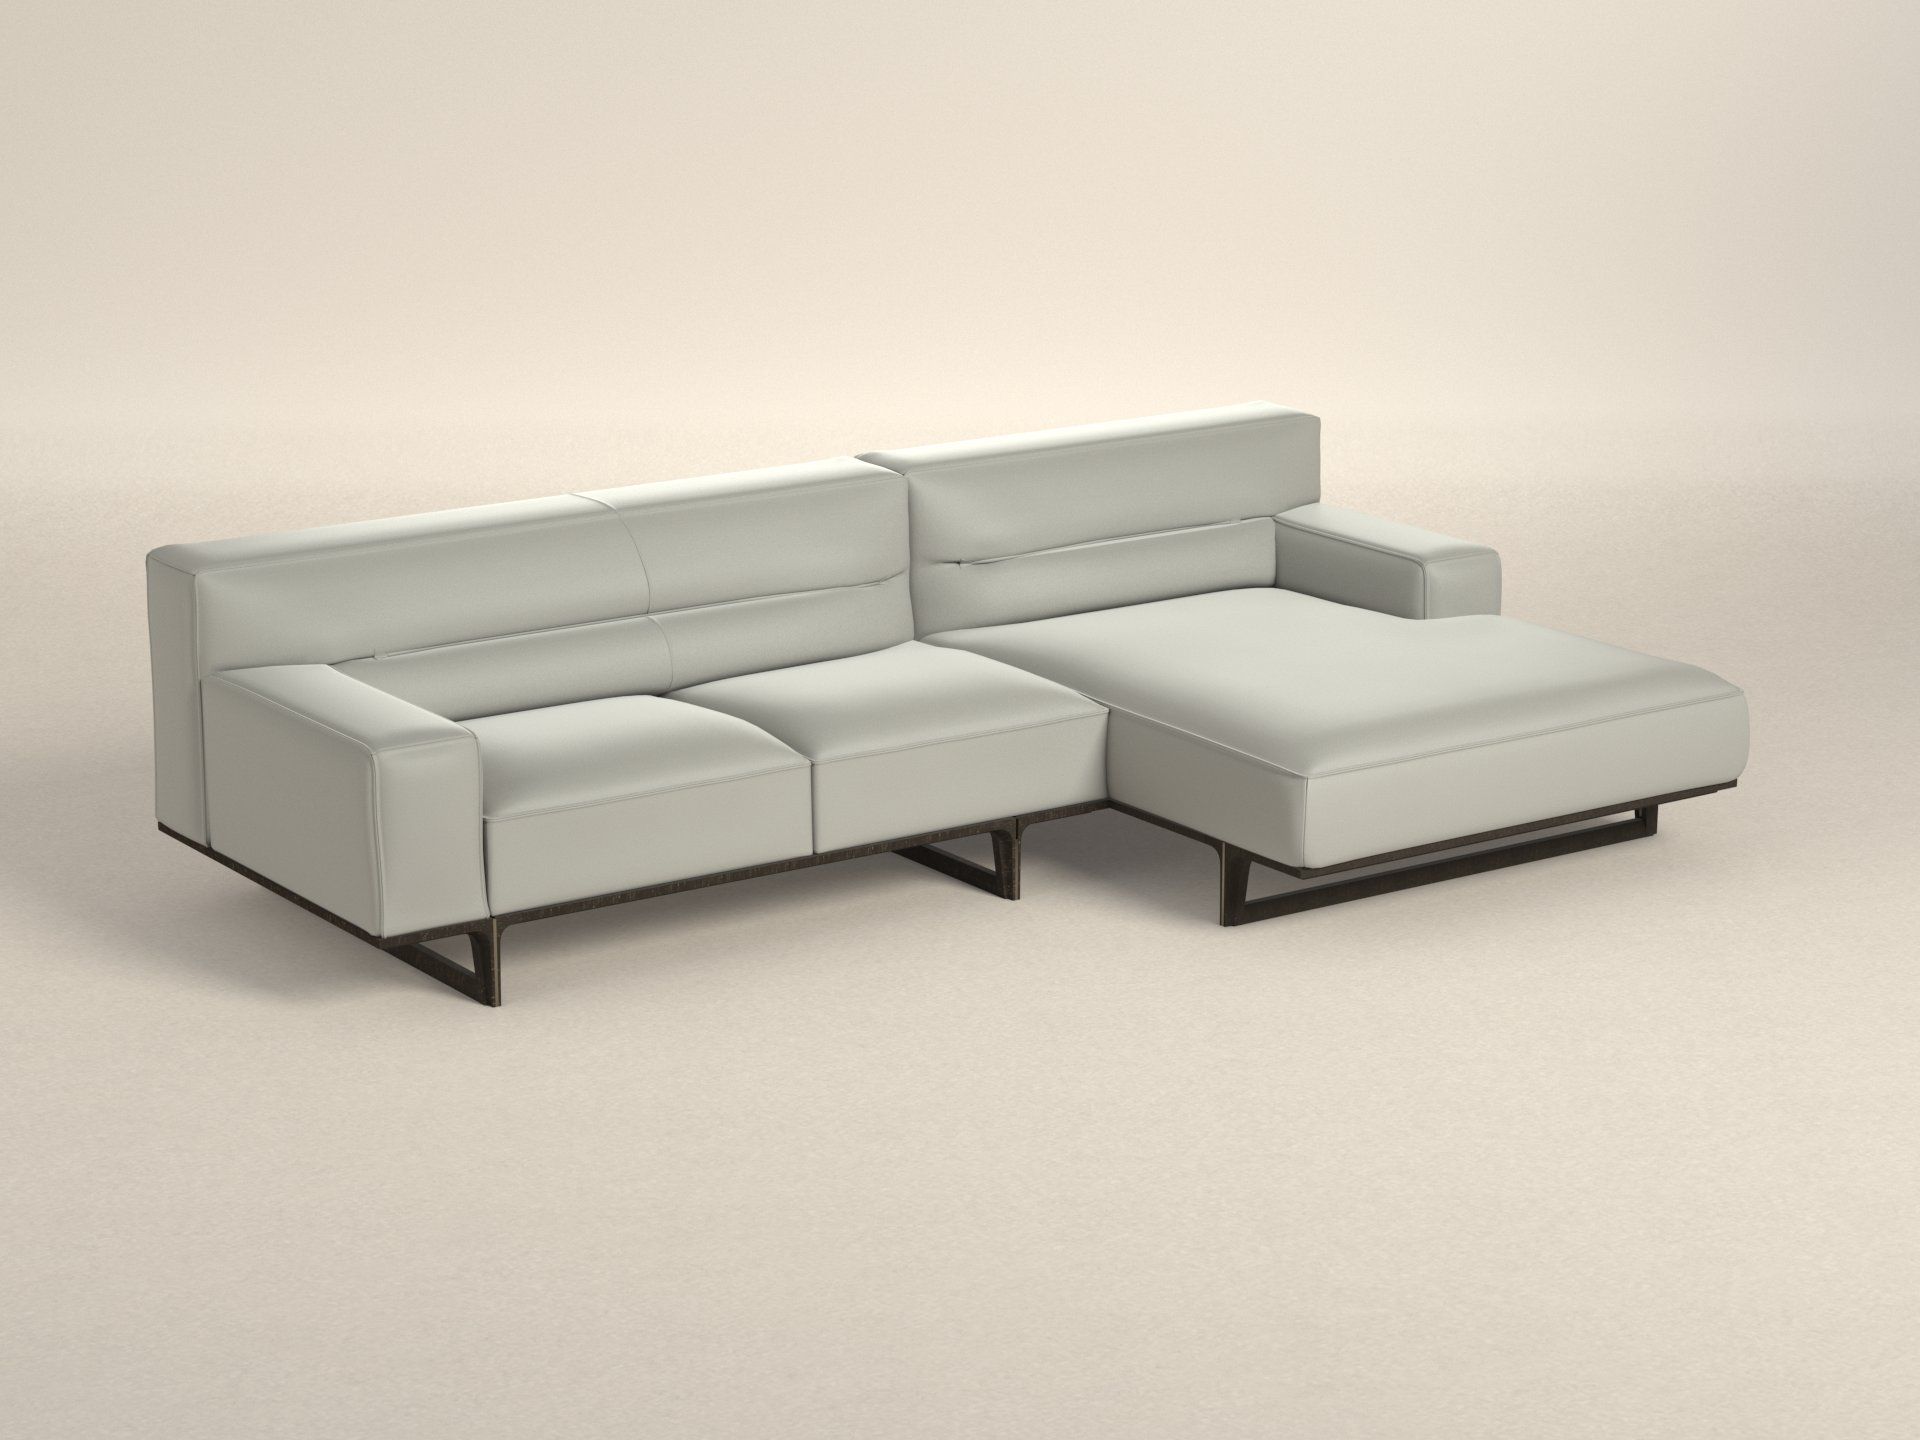 Preset default image - Kendo Sofa with Chaise on right side - Leather